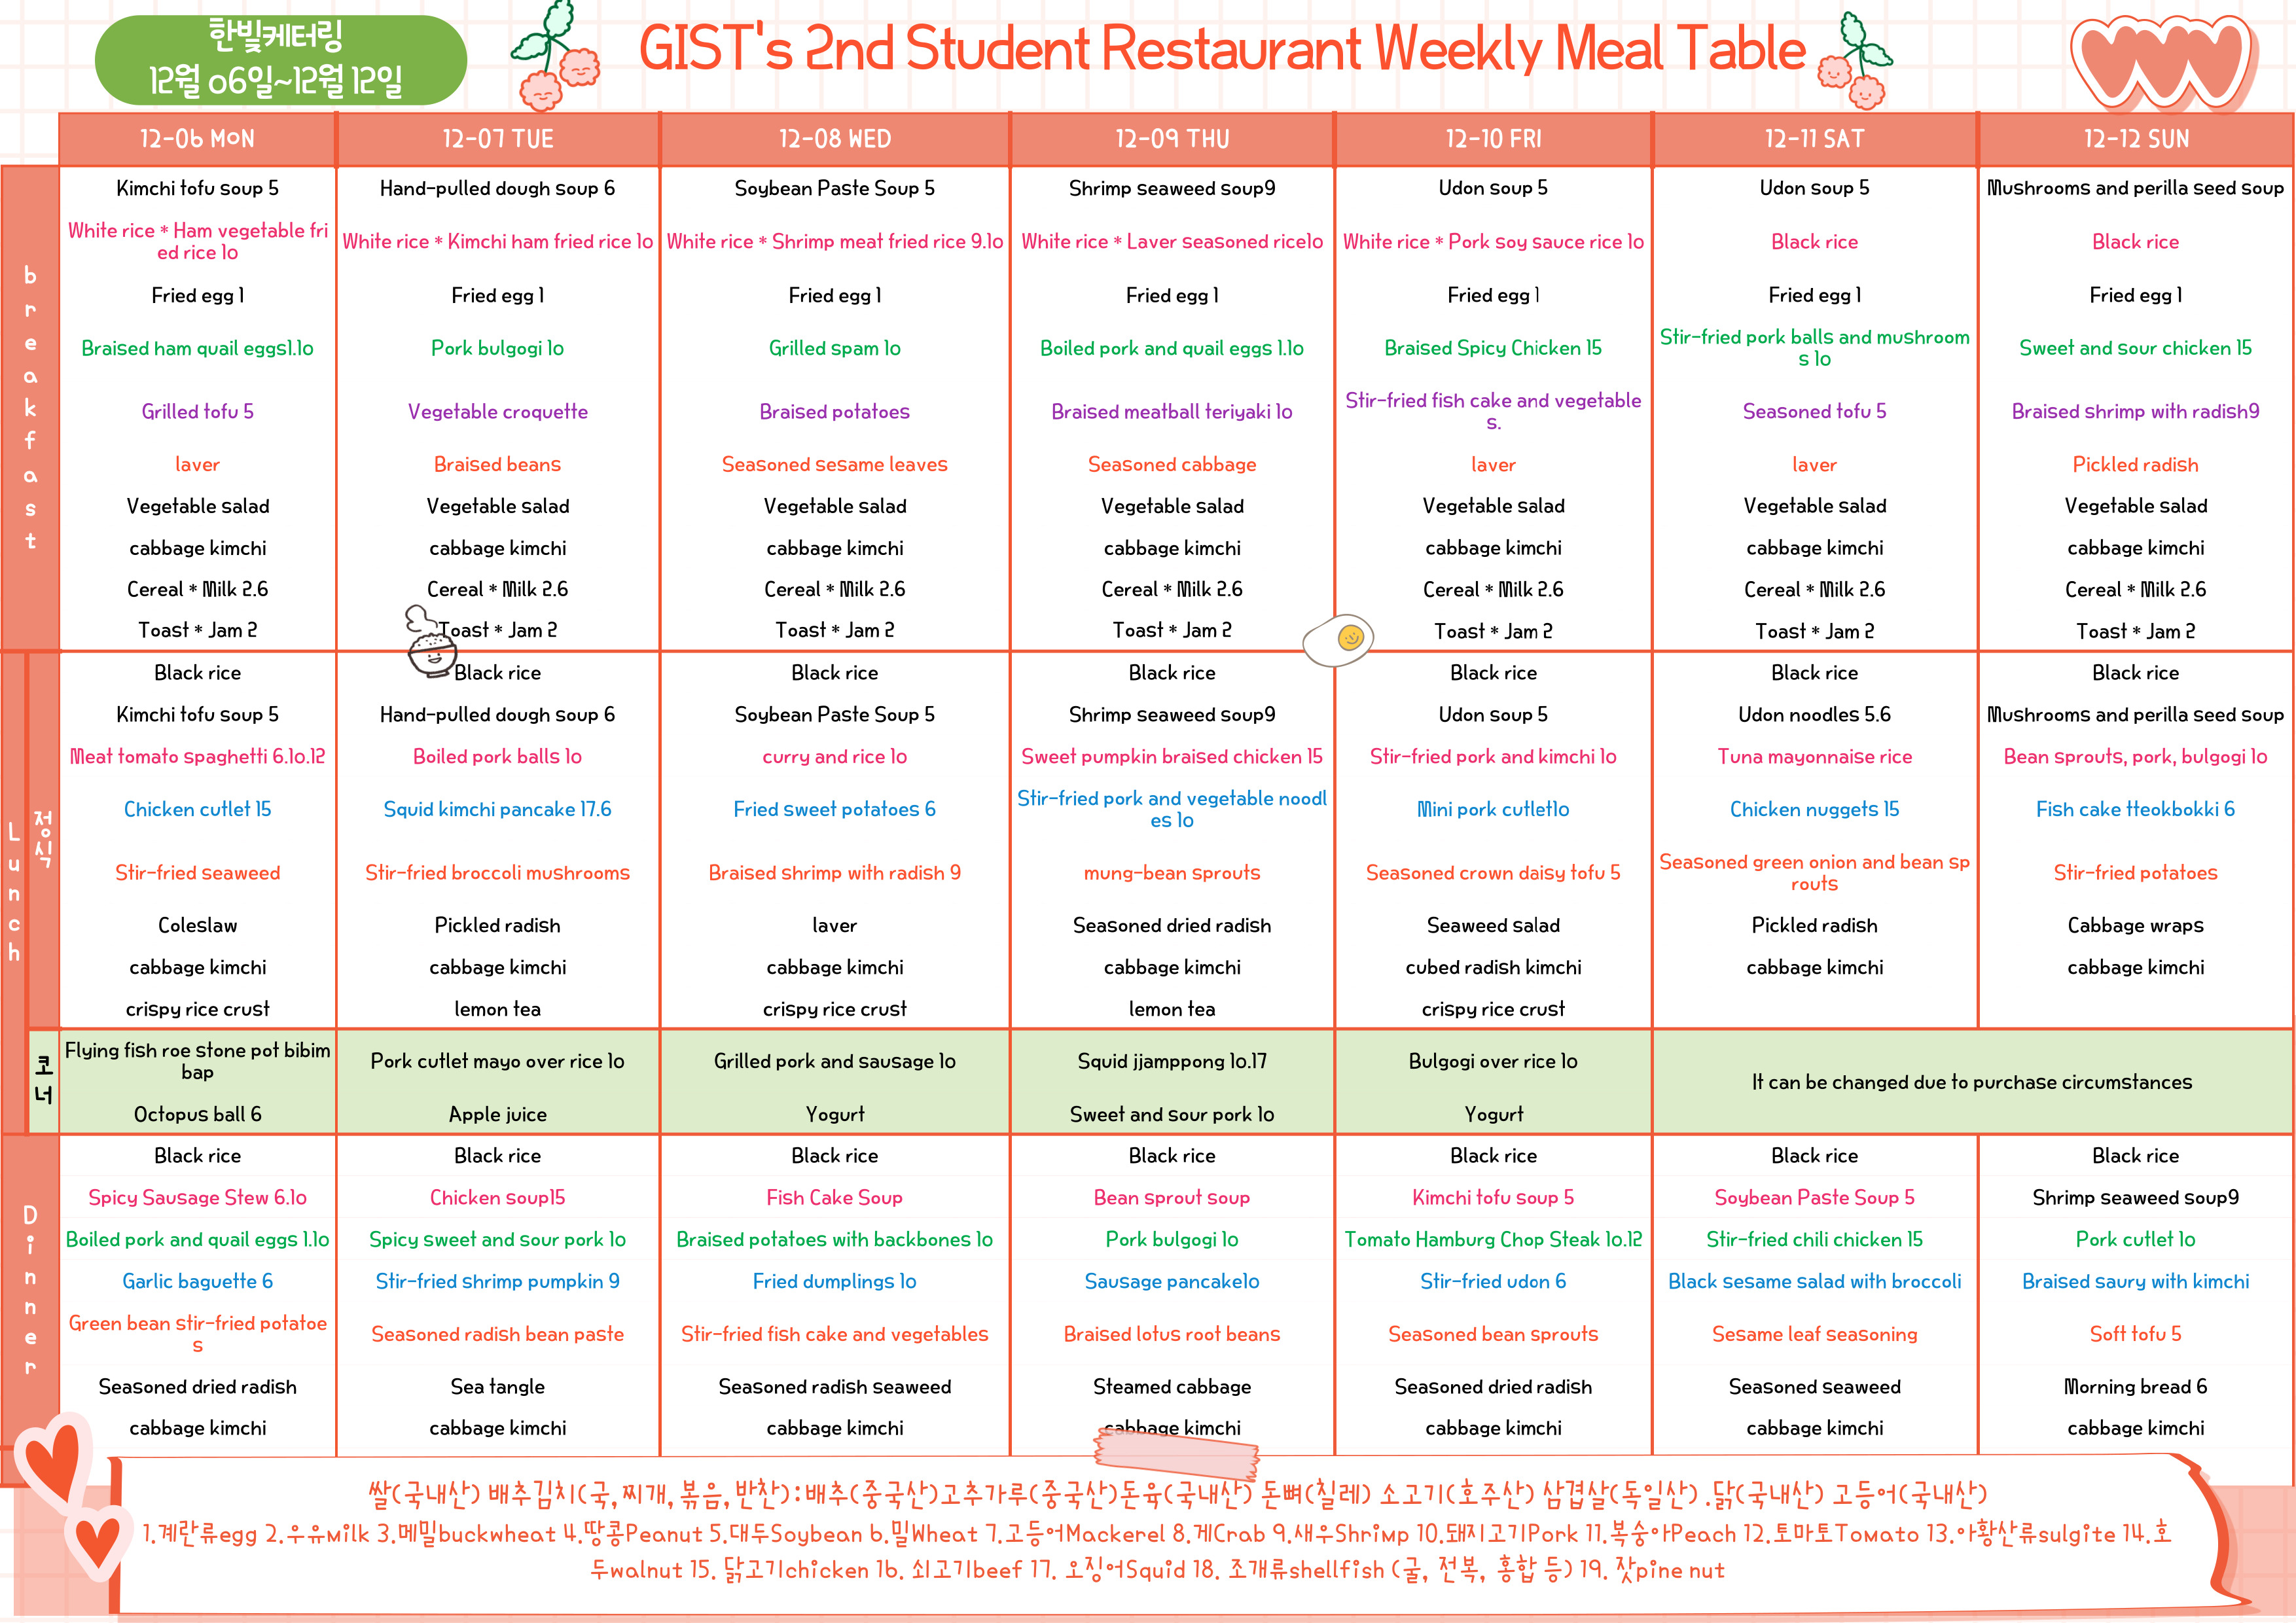 The 2nd Student Restaurant Weekly Meal Table (2021.12.06 ~2021.12.12) 이미지